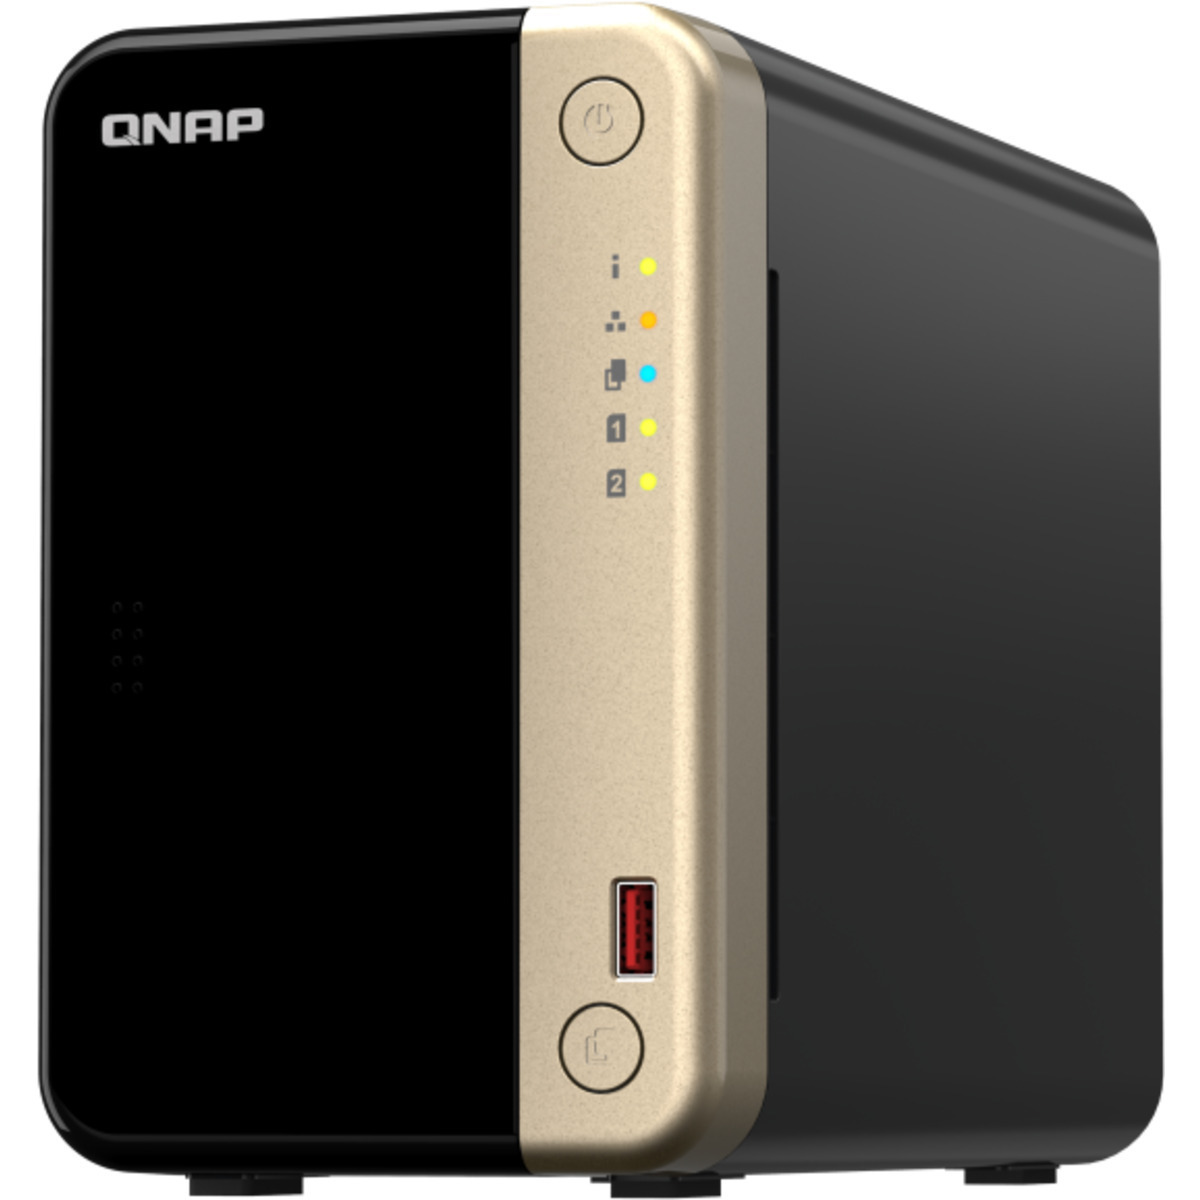 QNAP TS-264 8tb 2-Bay Desktop Multimedia / Power User / Business NAS - Network Attached Storage Device 2x4tb Toshiba MN Series MN08ADA400E 3.5 7200rpm SATA 6Gb/s HDD NAS Class Drives Installed - Burn-In Tested - ON SALE TS-264